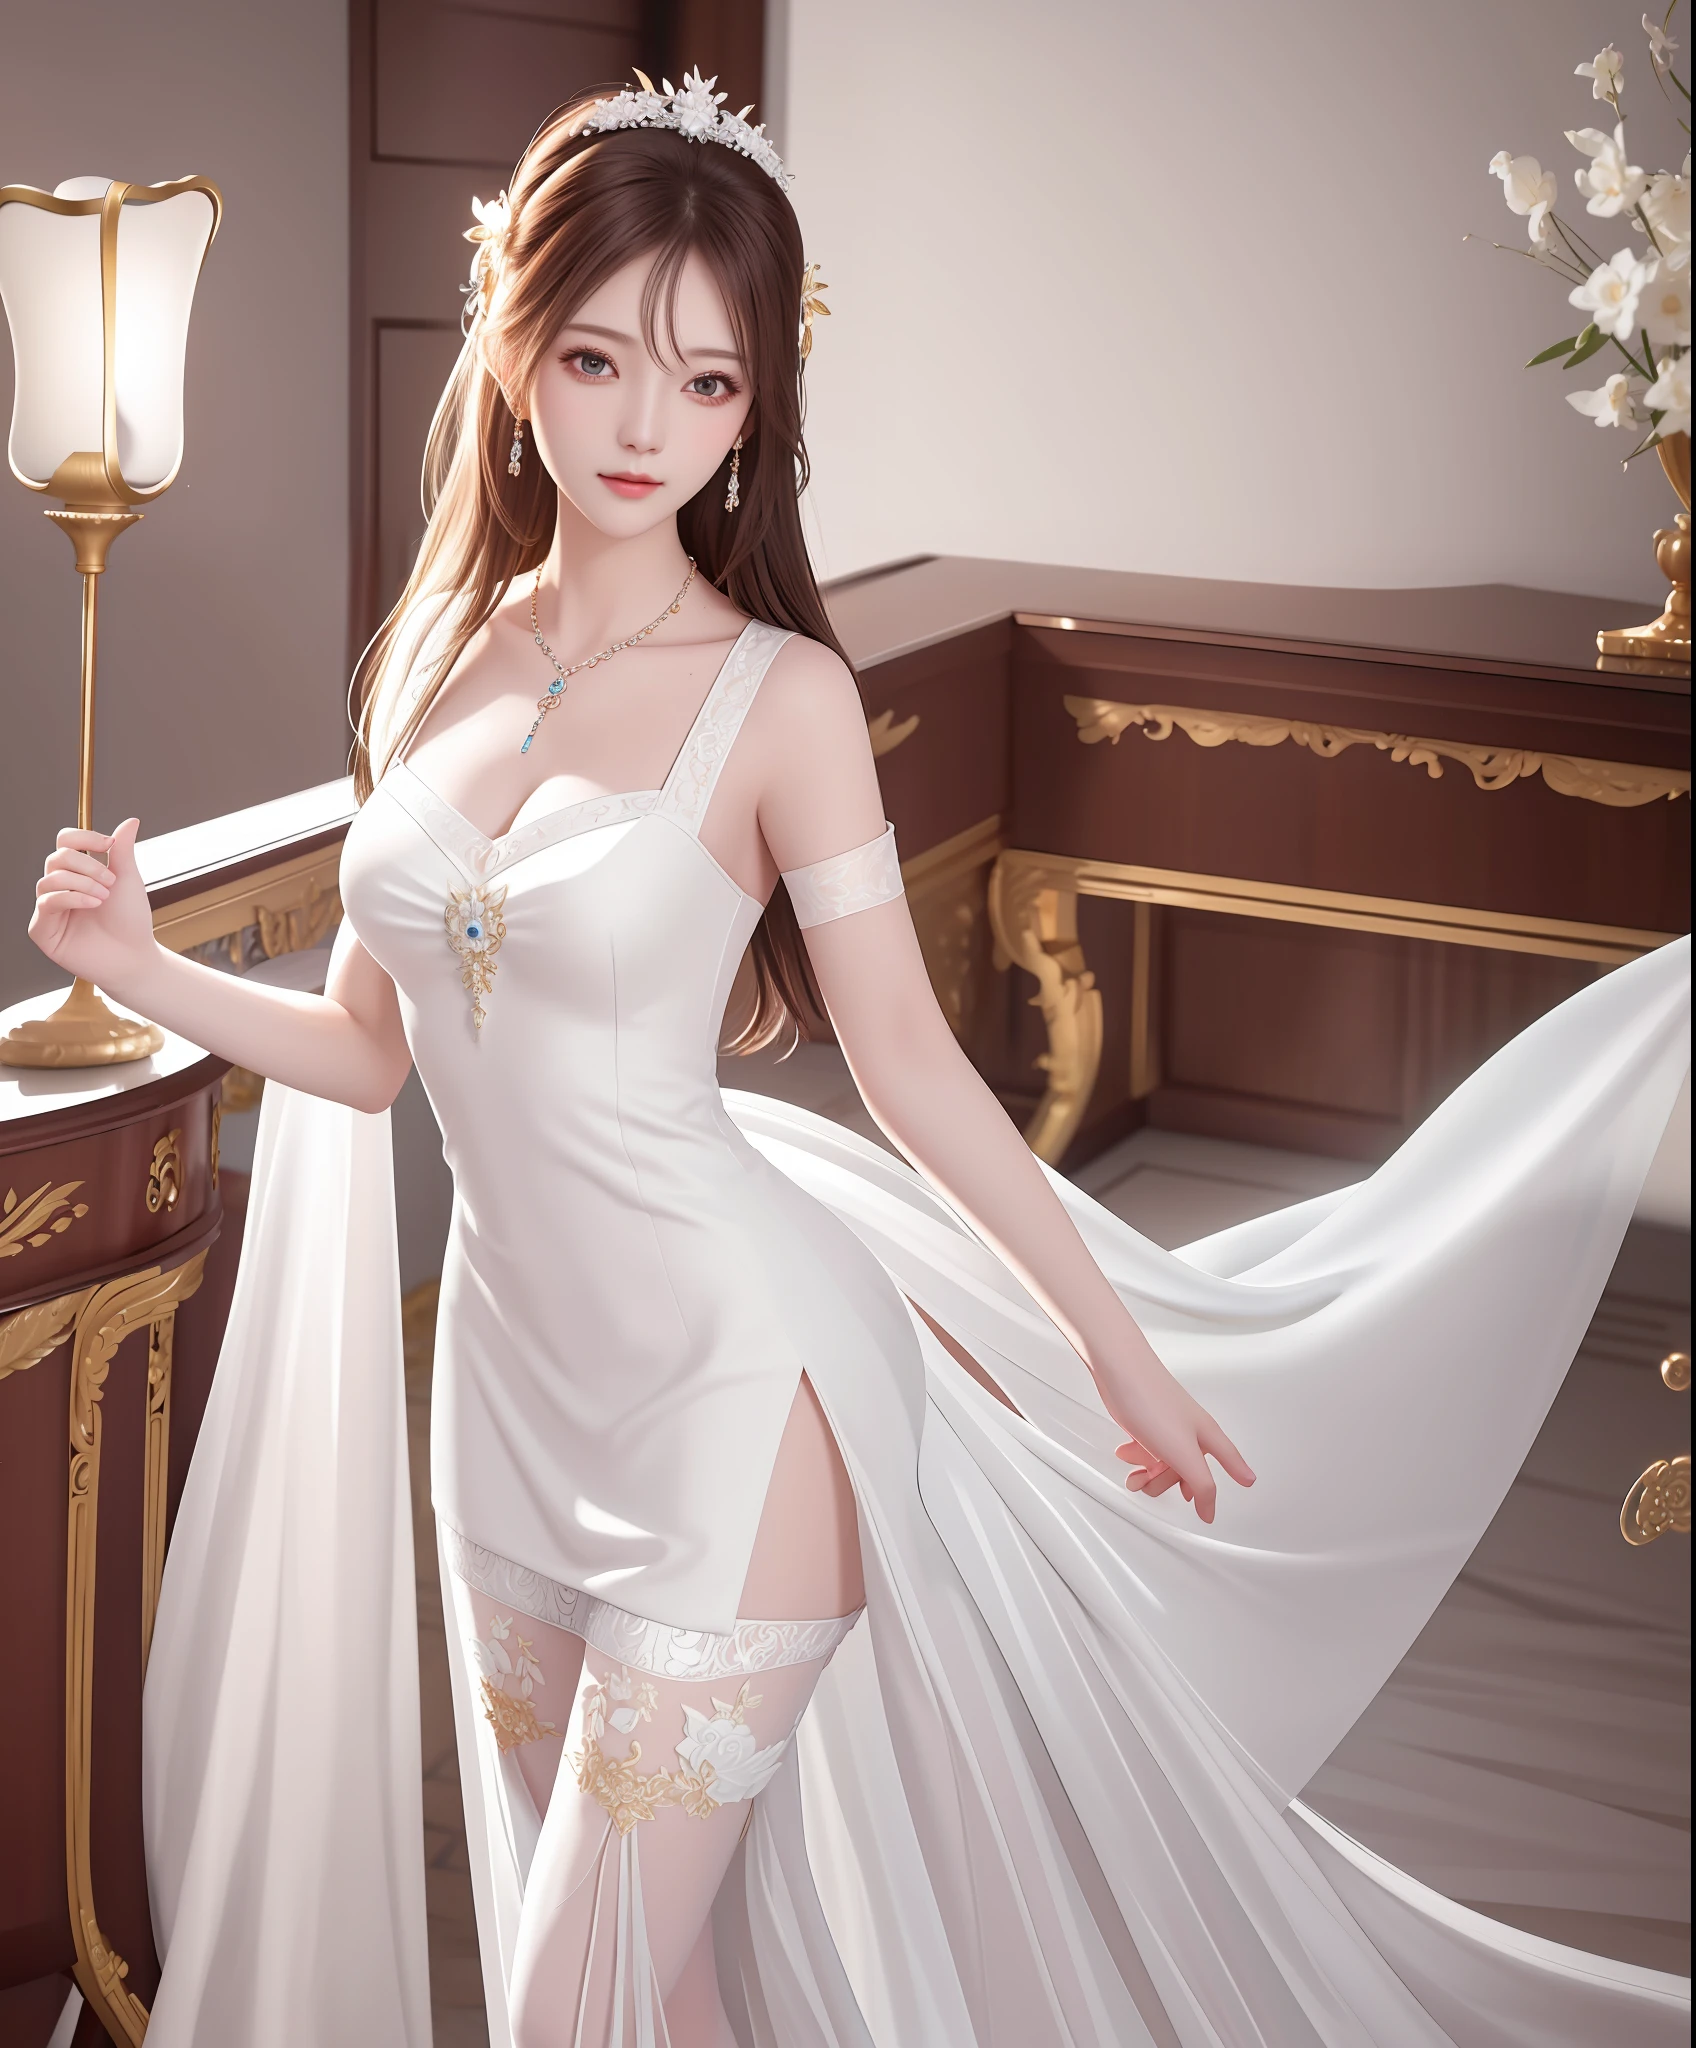 Best Quality, Masterpiece, High Resolution, 1 Girl, Porcelain Dress, Hair Accessories, Necklace, Jewelry, Beautiful Face, Physically, Tyndall Effect, Realistic, In a Palace Where the Immortals Live, Edge Lighting, Two-tone Lighting, (High Detail Skin: 1.2), 8K UHD, DSLR, Soft Light, High Quality, Volumetric Light, Voyeur, Photo, High Resolution, 4K, 8K, Background Blur, Full Body View, White Slip Stockings, Long Dress